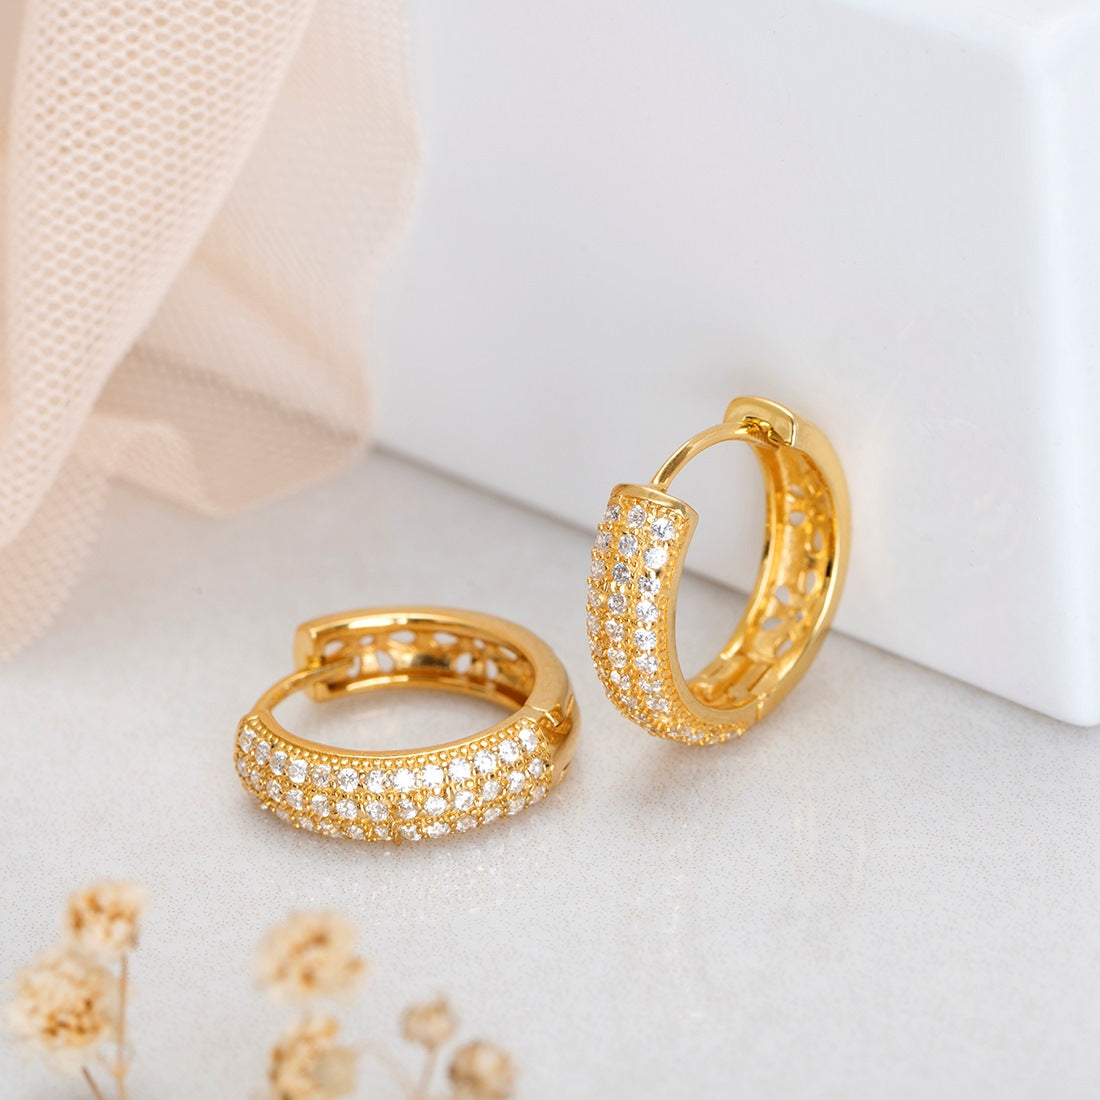 Golden Radiance Gold-Plated 925 Sterling Silver Hoop Earrings